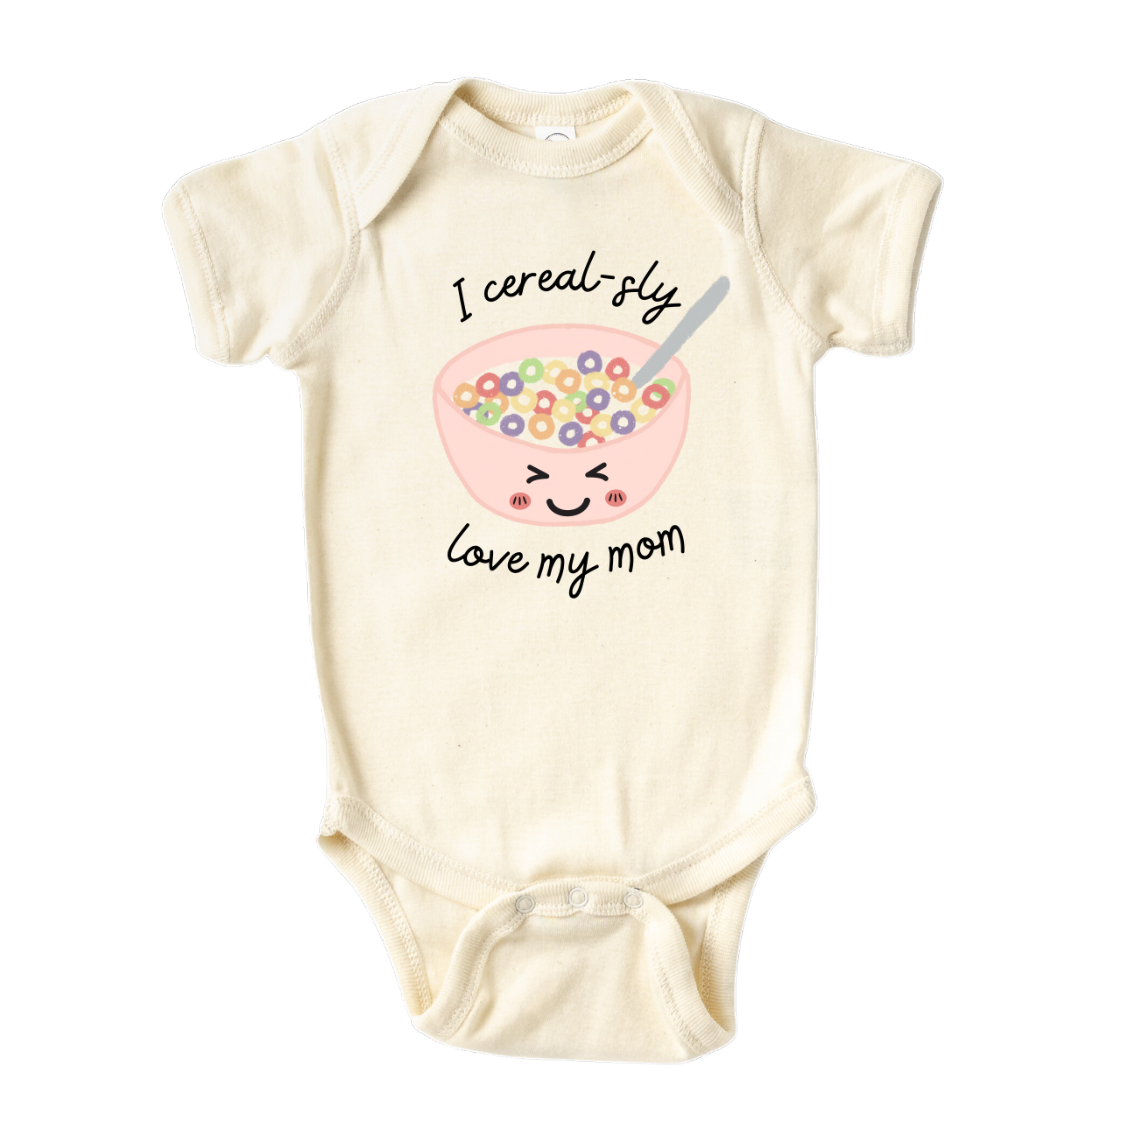 Natural Onesie - Cute cereal bowl graphic print with customizable text - 'I Cereal-sly Love My Mom' on a kid t-shirt and baby onesie. High-quality and vibrant design for adorable children's clothing. Perfect gift option to express love for Mom. 